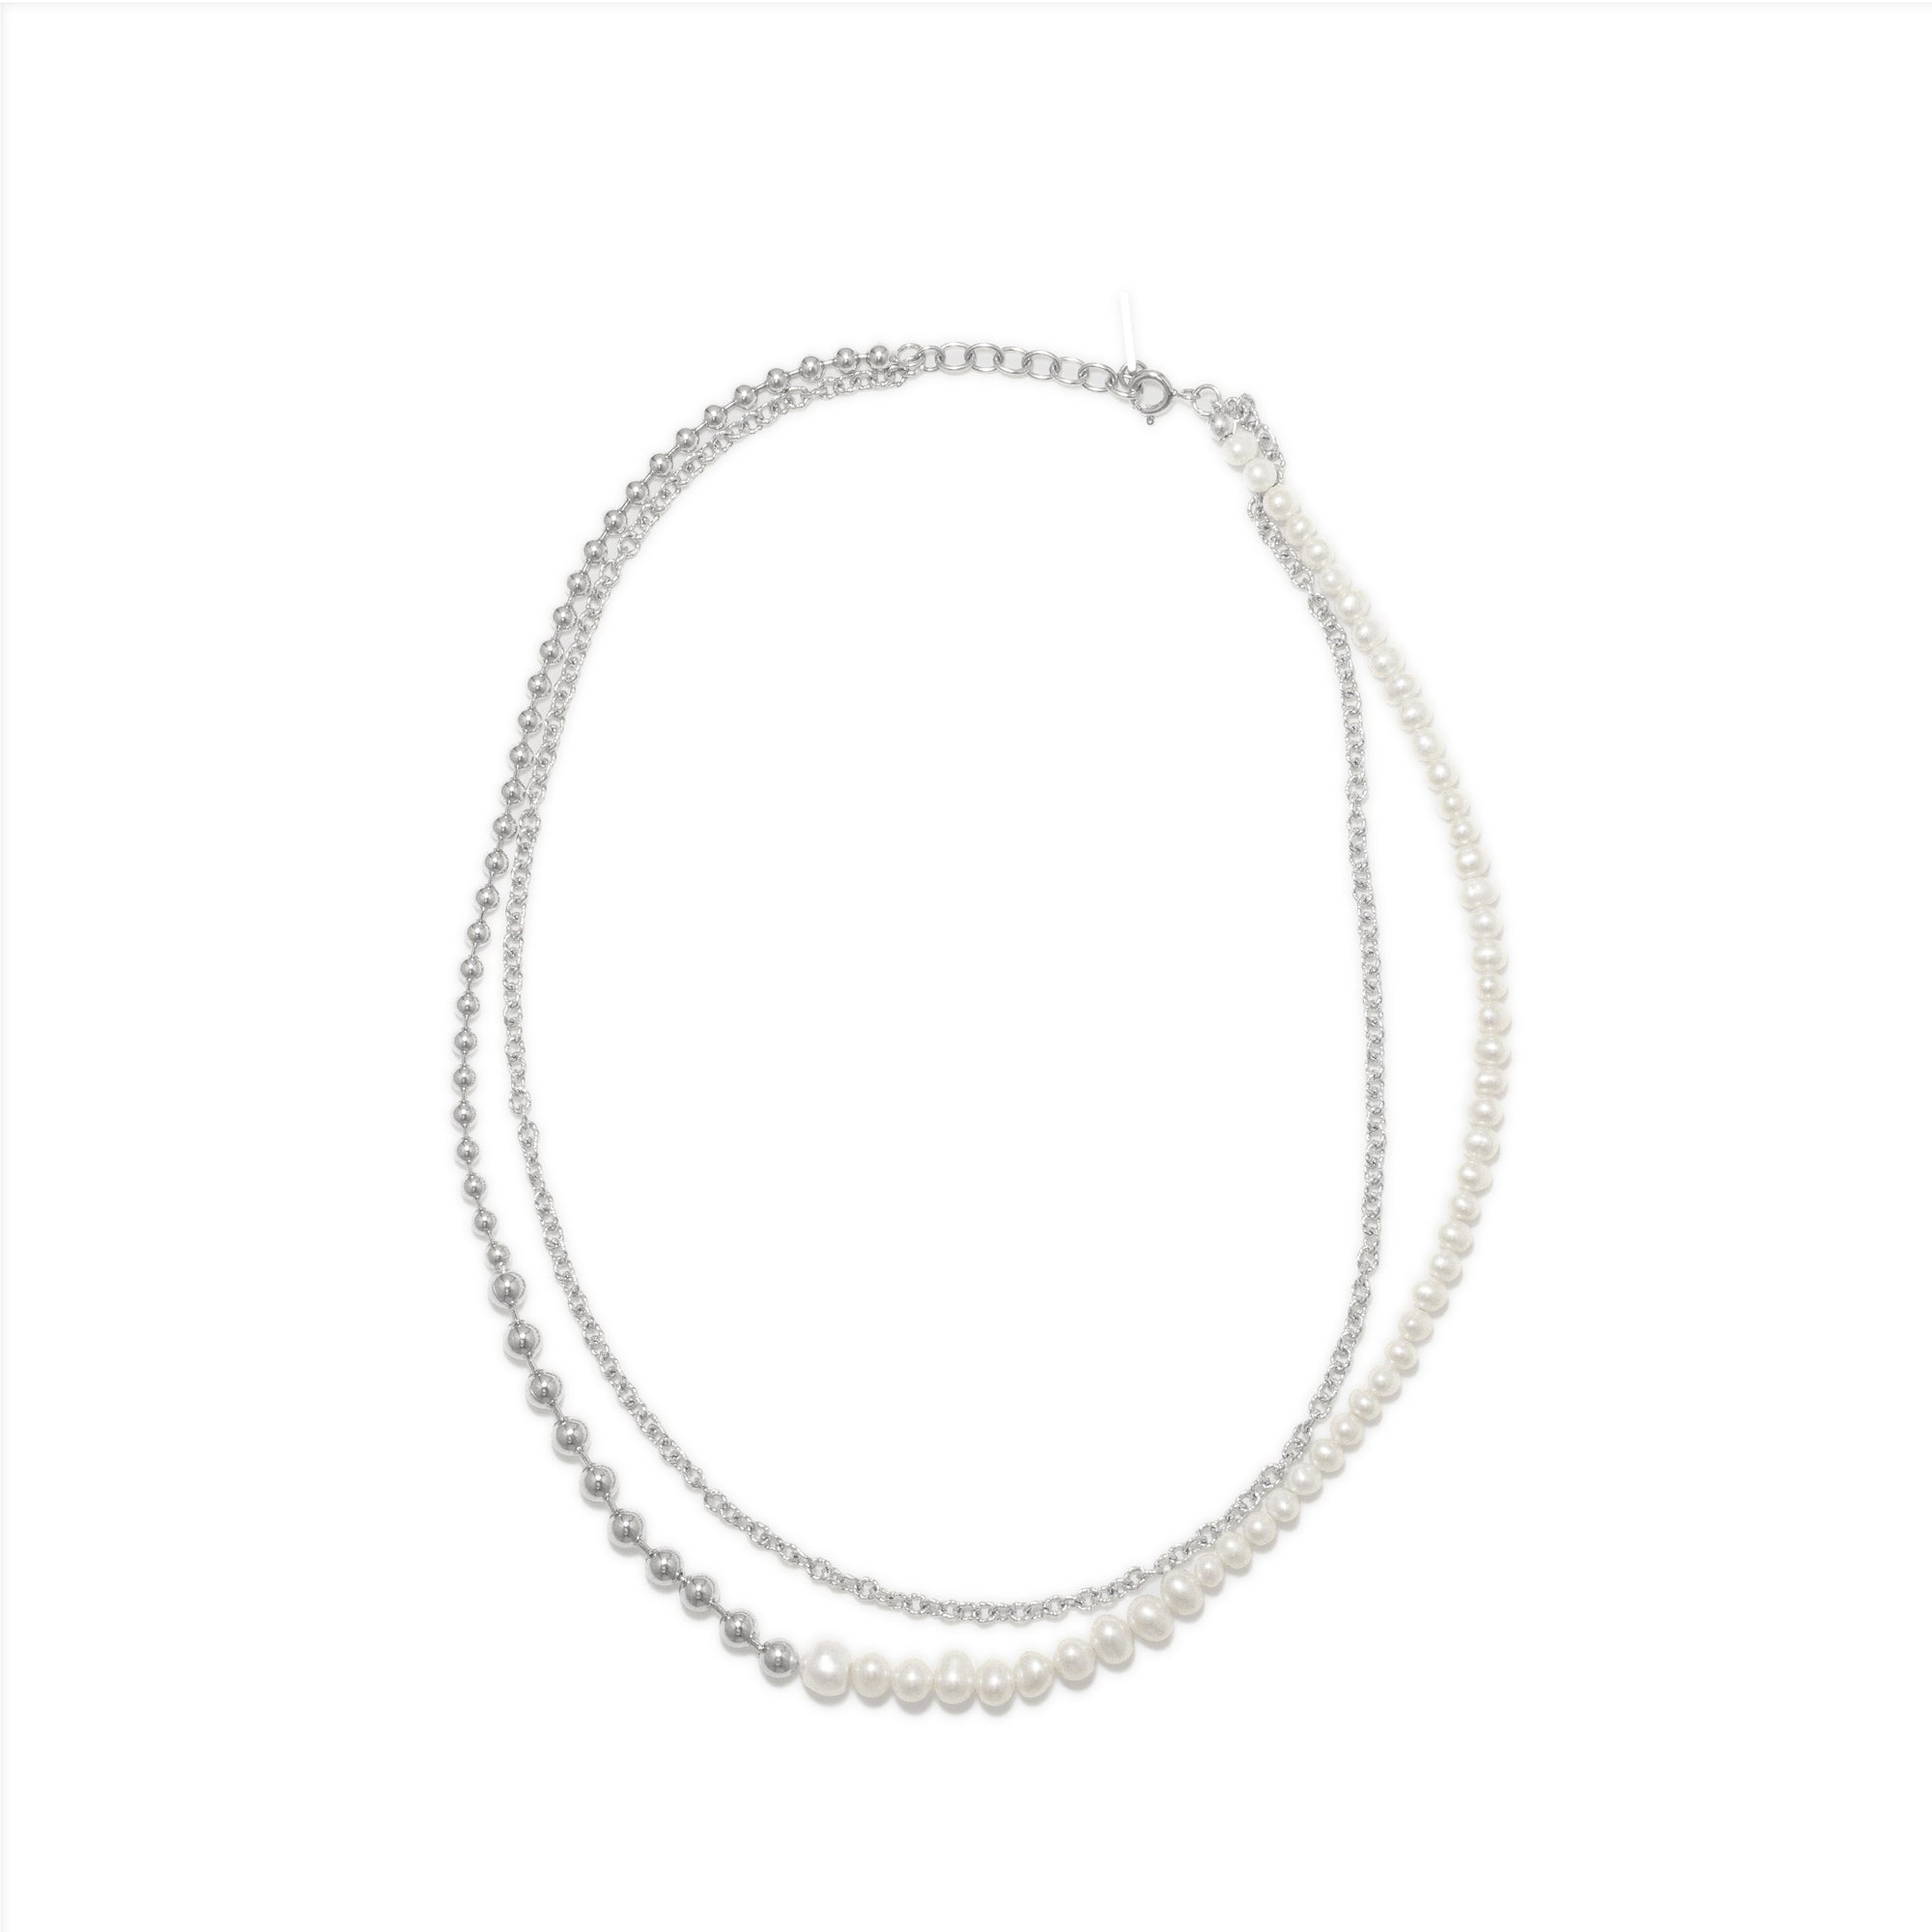 Completedworks - Women's Forgotten Seas Necklace - (Pearl/Rhodium Plated) view 1